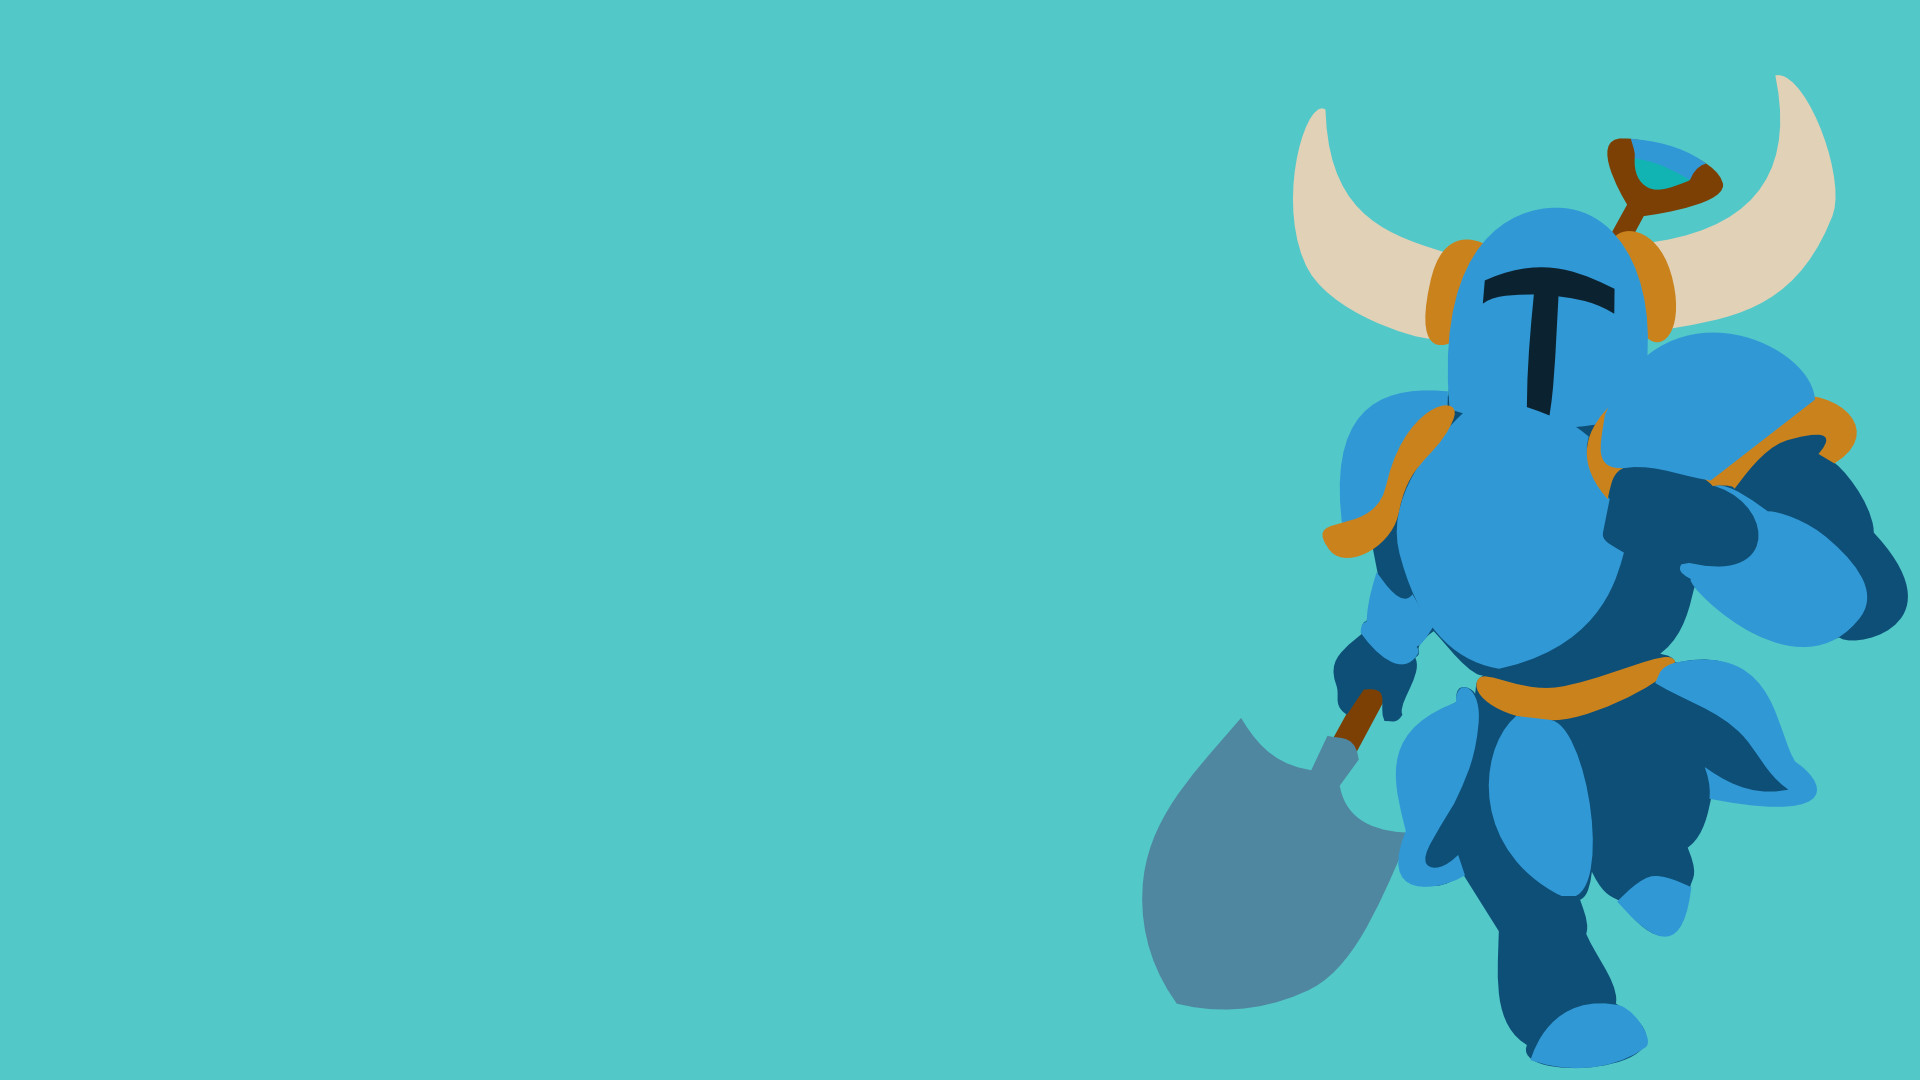 ImageI make vector art. Thanks to / u / Remersions suggestion, I made yall a Shovel Knight wallpaper